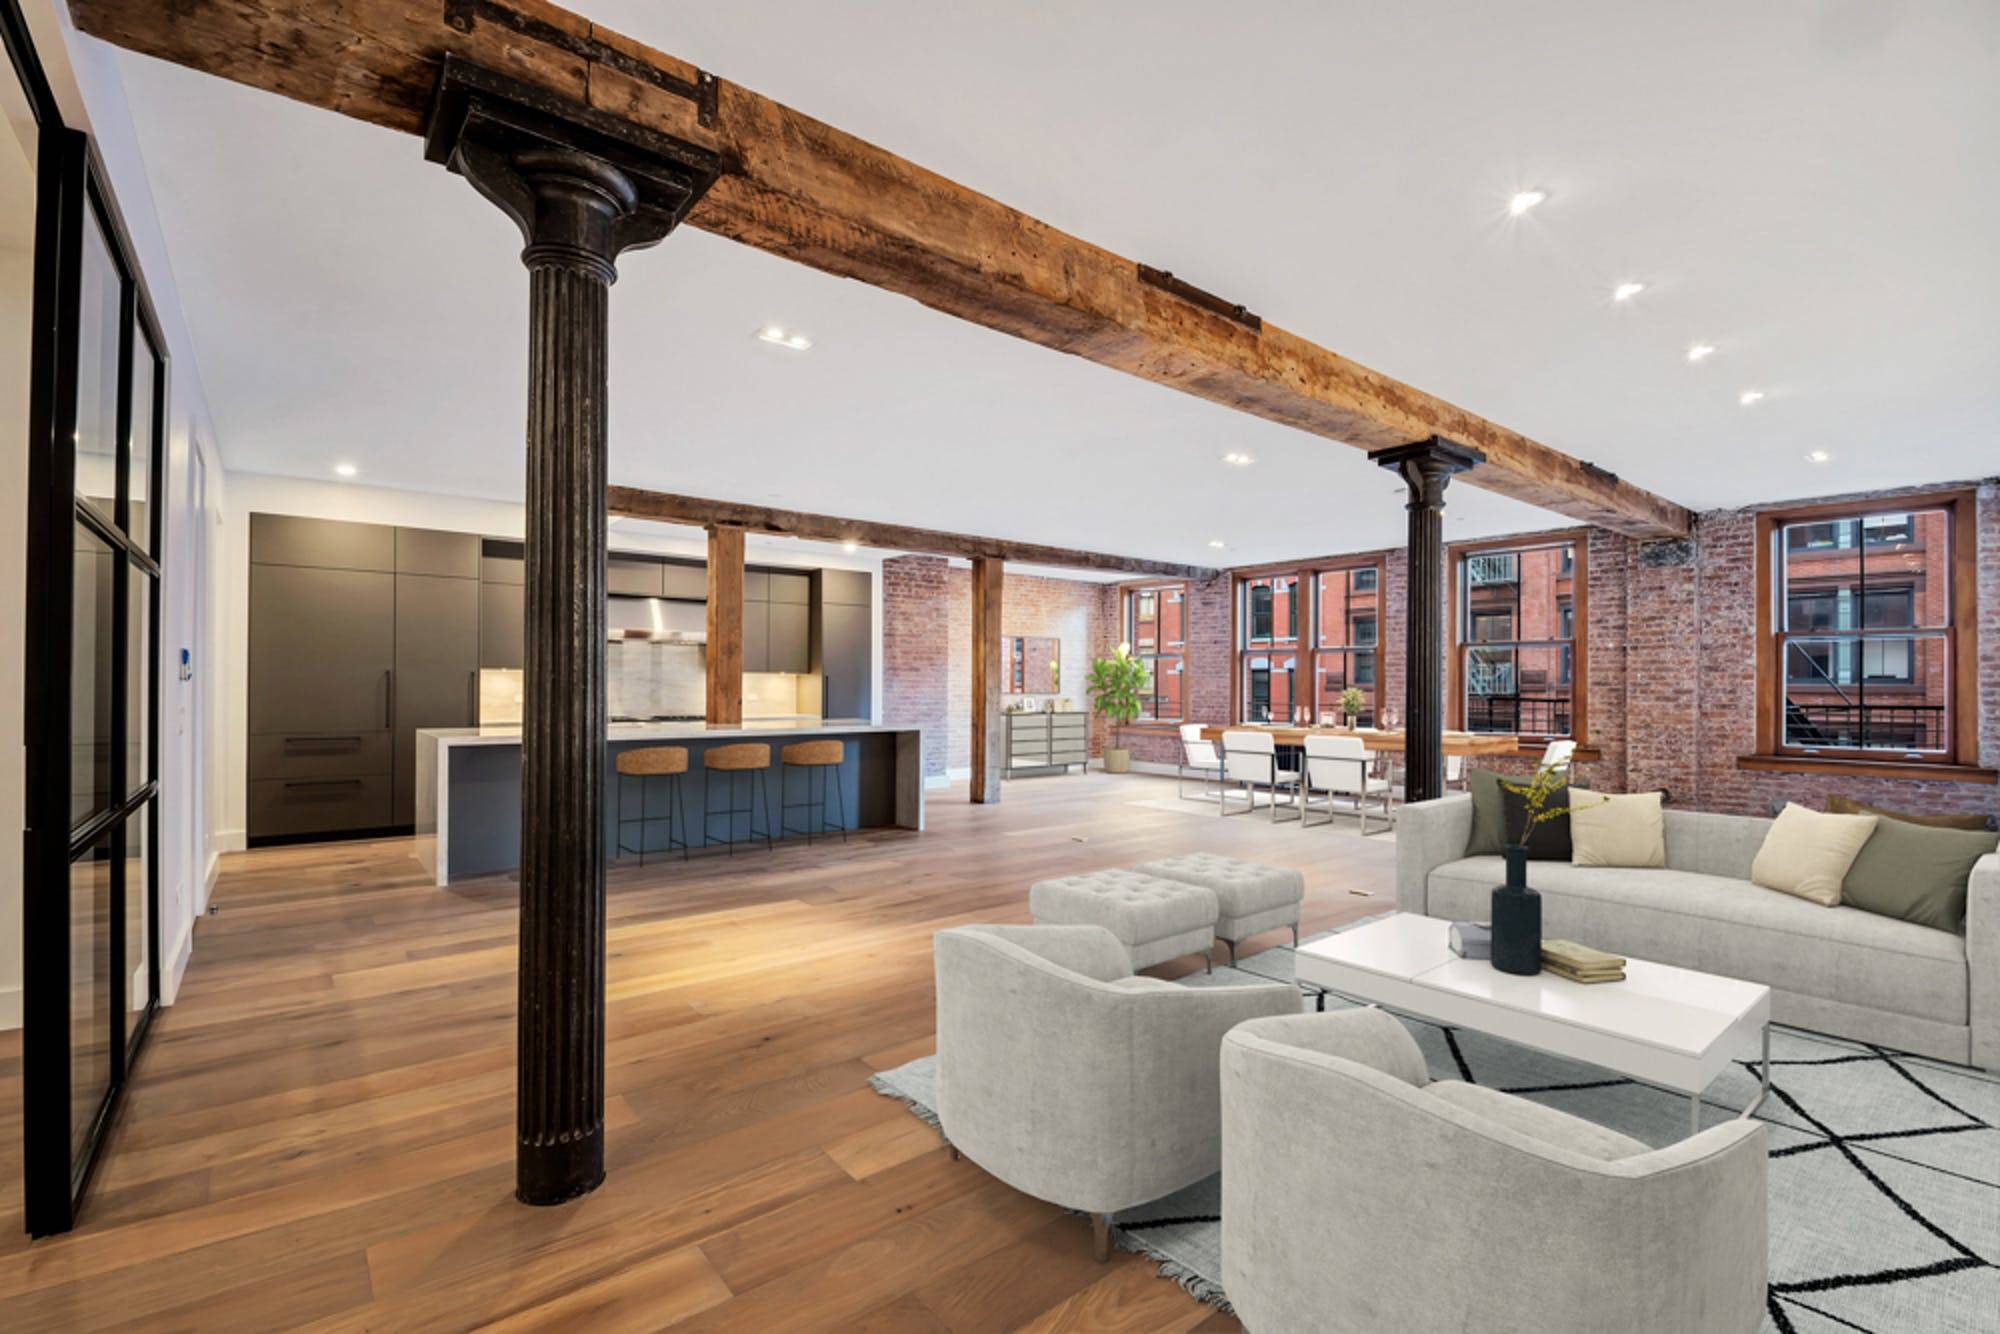 Welcome to 186 Franklin Street, a never before lived in 3900 square foot convertible five bedroom loft that seamlessly combines historical charm with contemporary design and luxury.